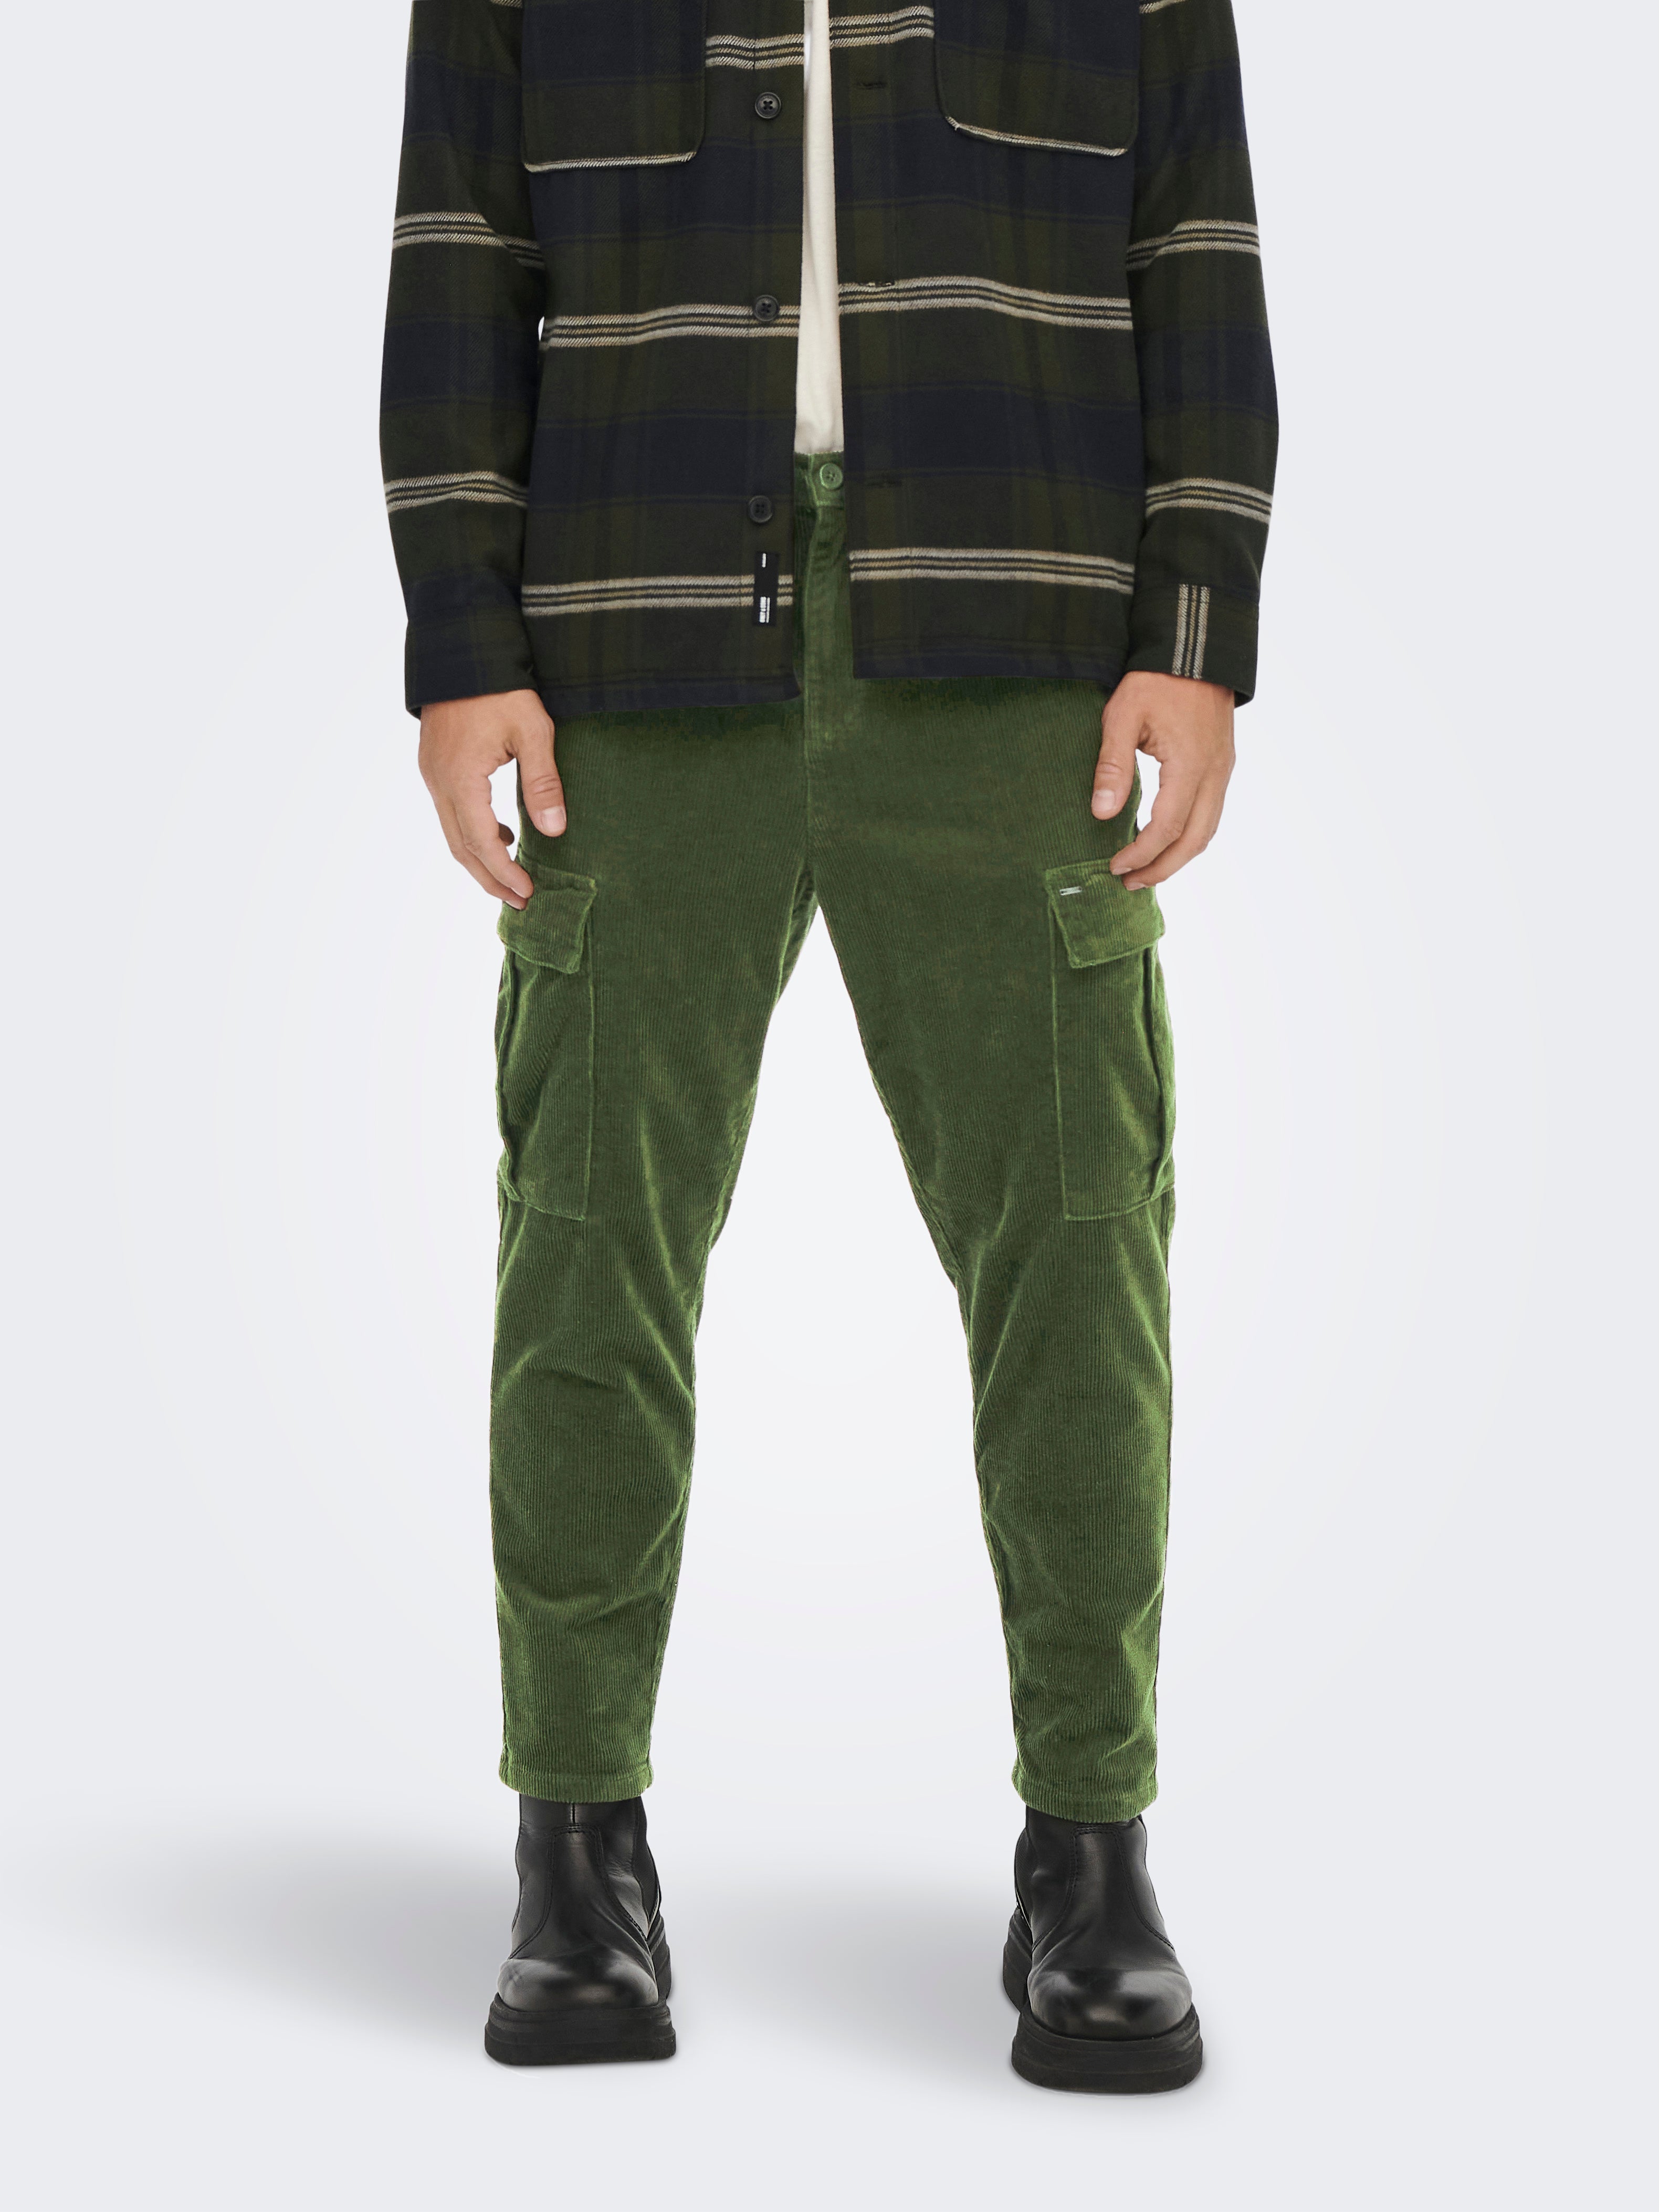 THE NORTH FACE PURPLE LABEL Corduroy Cargo Pants – unexpected store